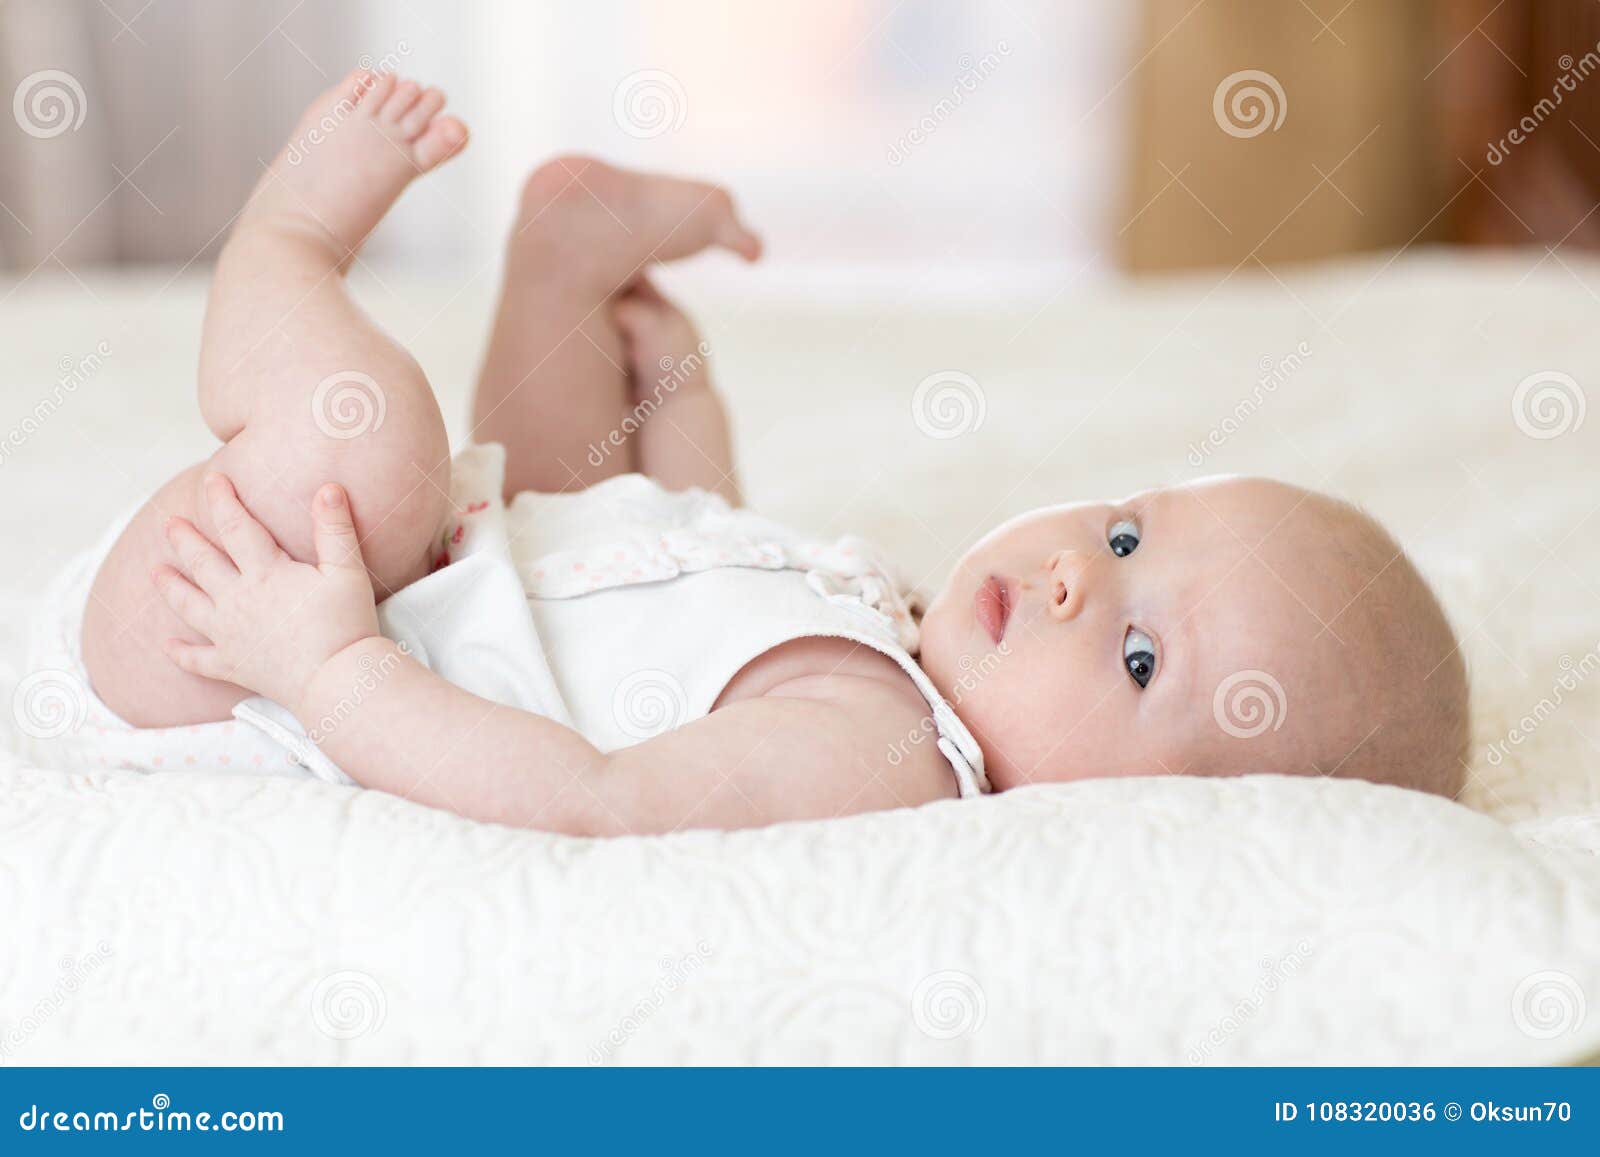 Cute 4 Months Baby Lying Down On Bed Stock Photo - Image ...